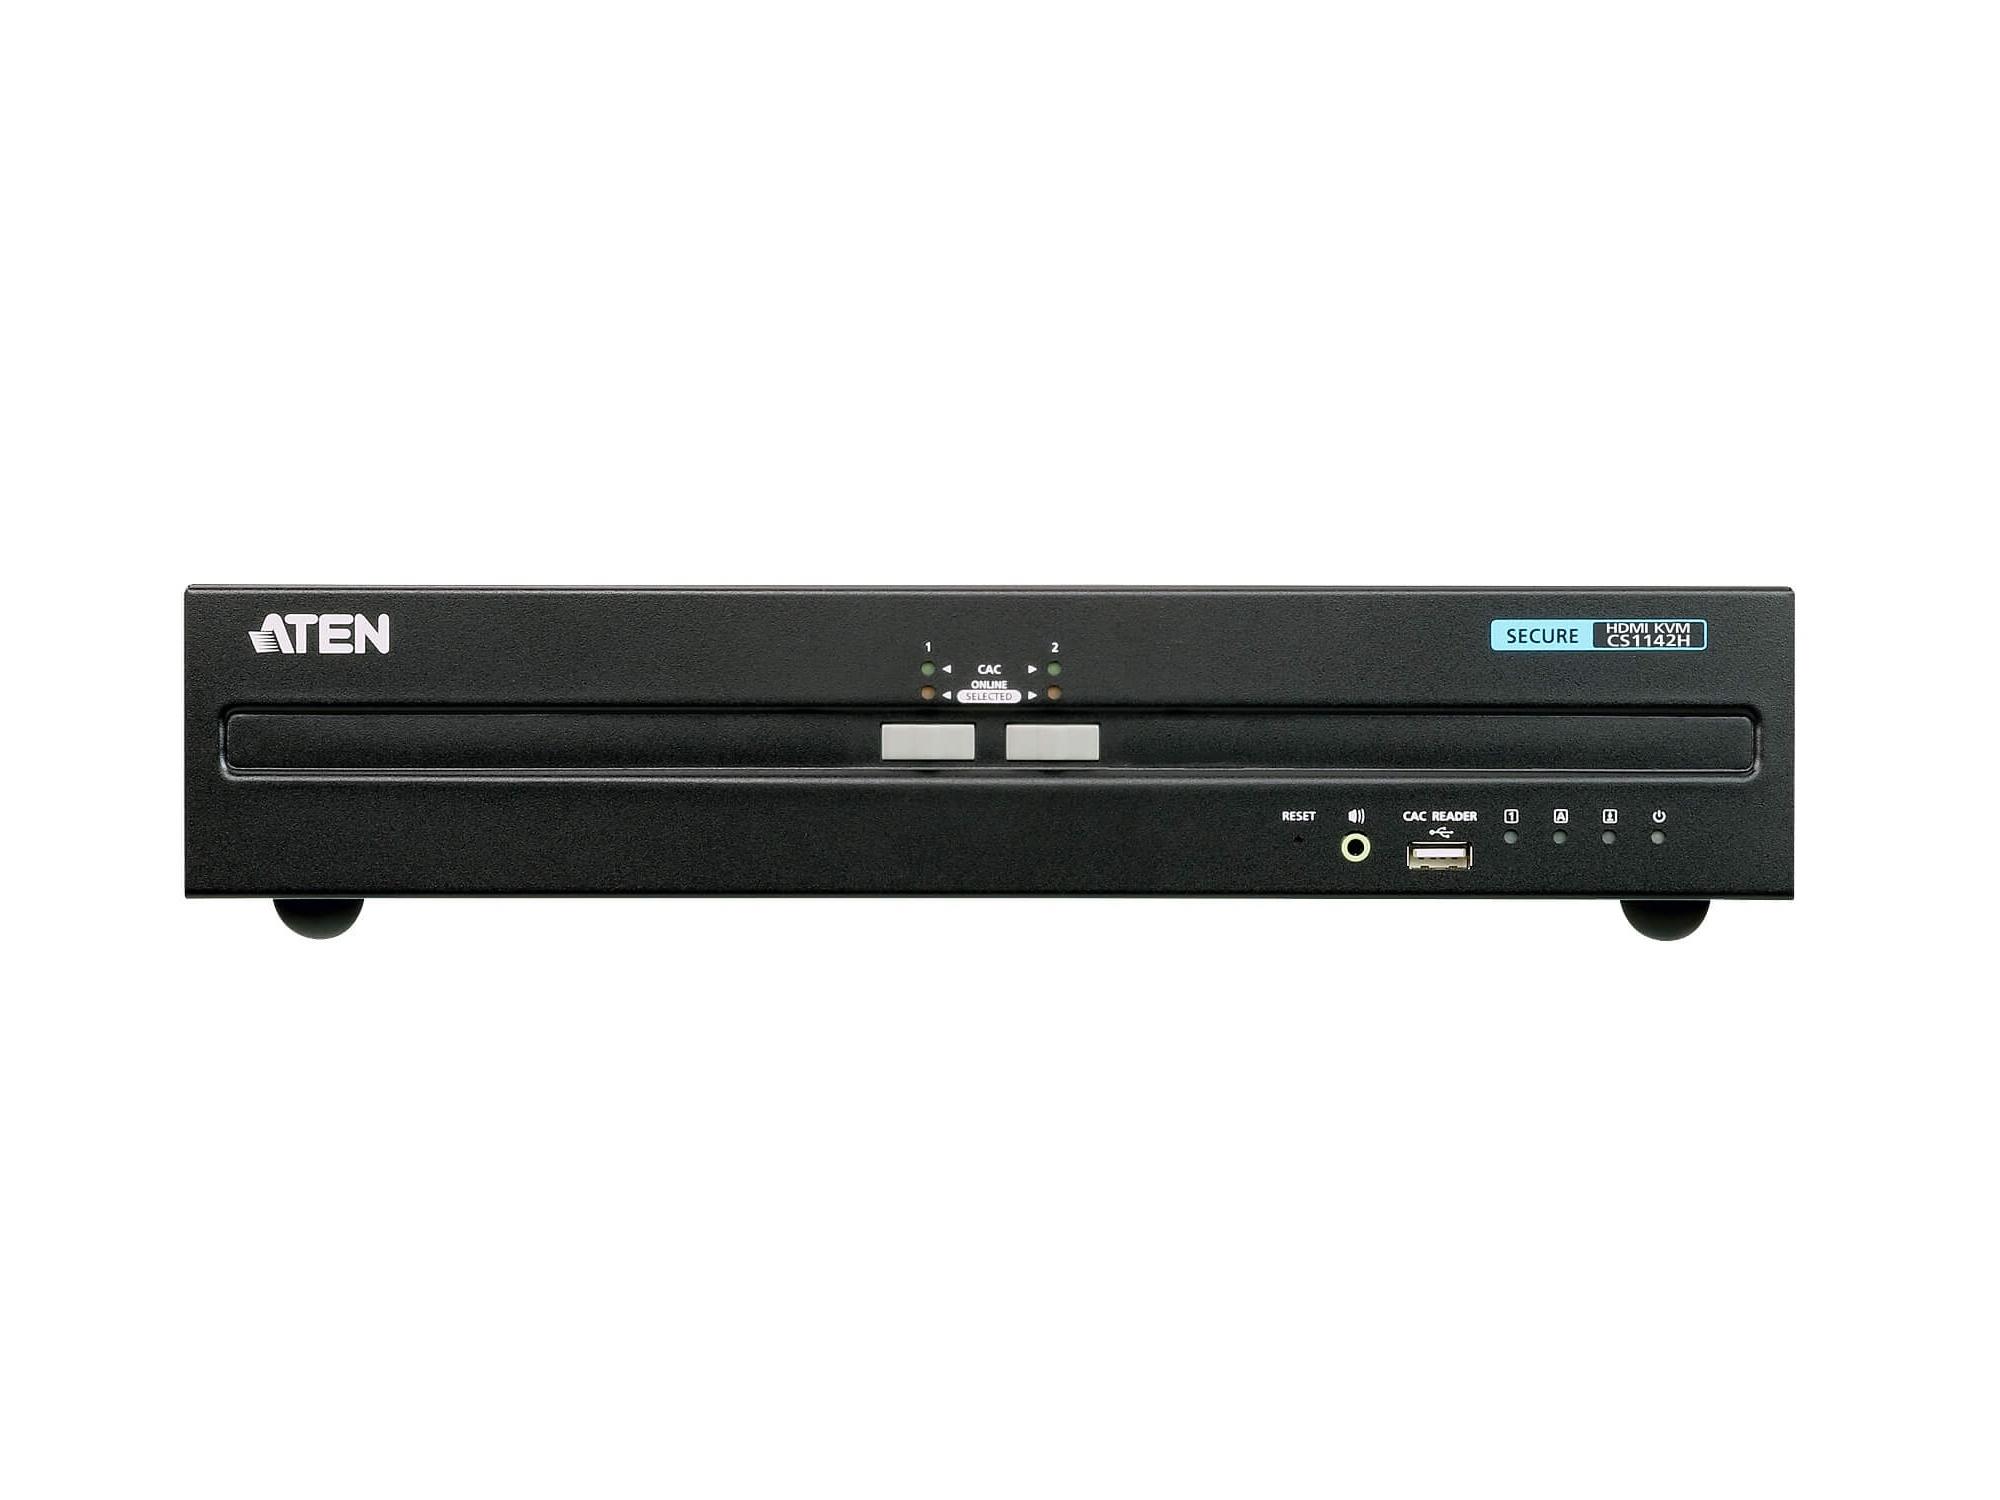 CS1142H 2-Port USB HDMI Dual Display Secure KVM Switch (PSS PP v3.0 Compliant) by Aten